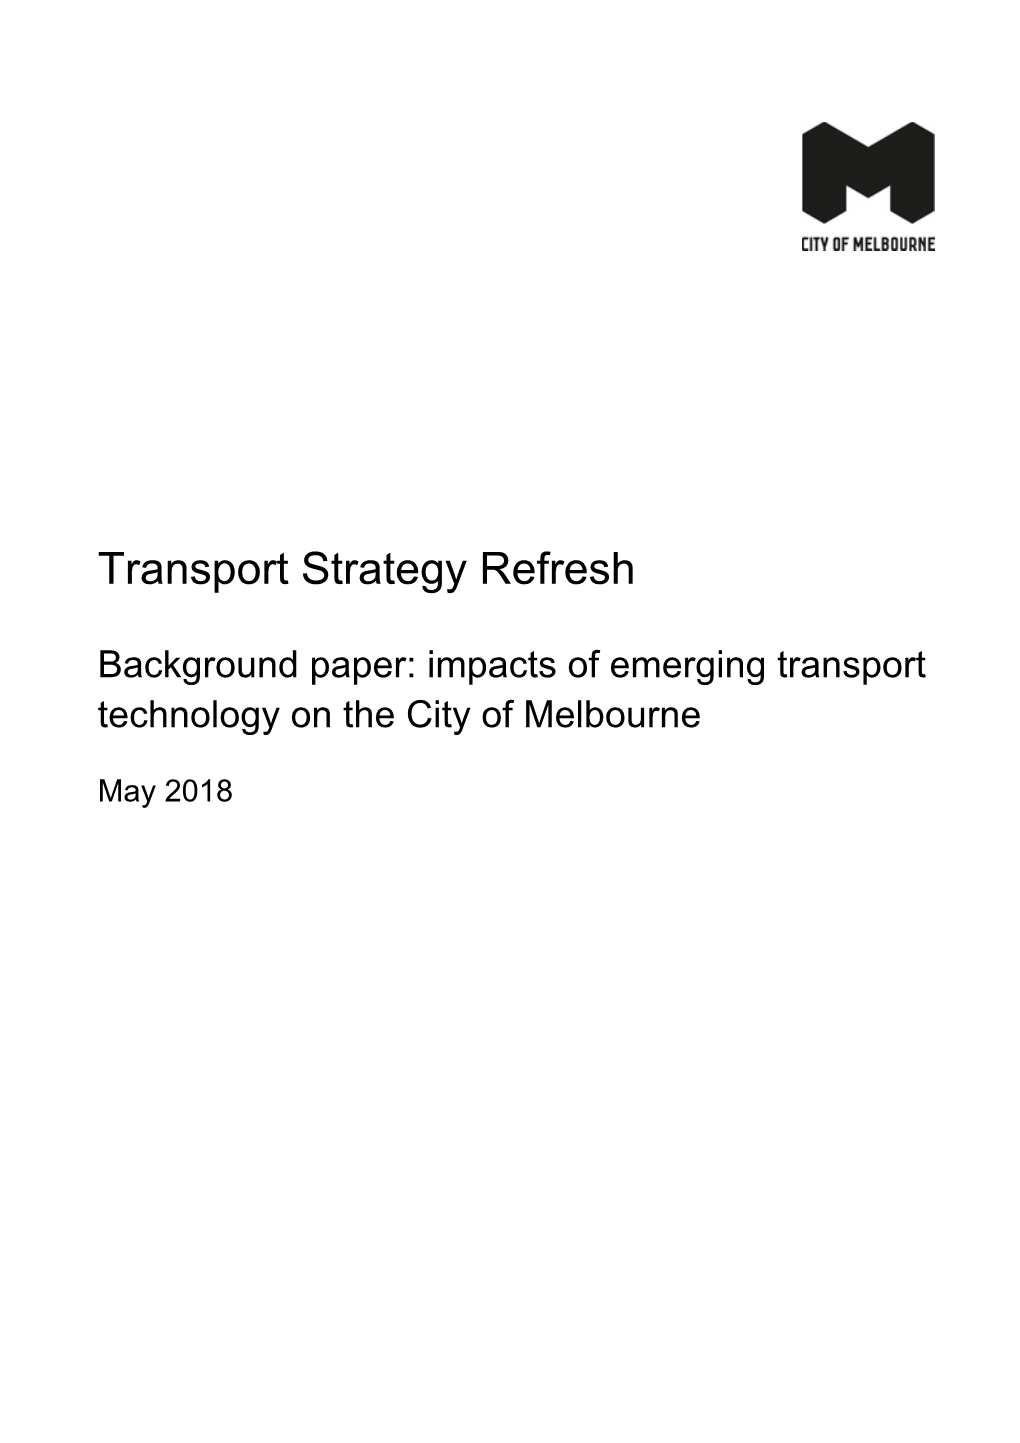 Impacts of Emerging Transport Technology on the City of Melbourne